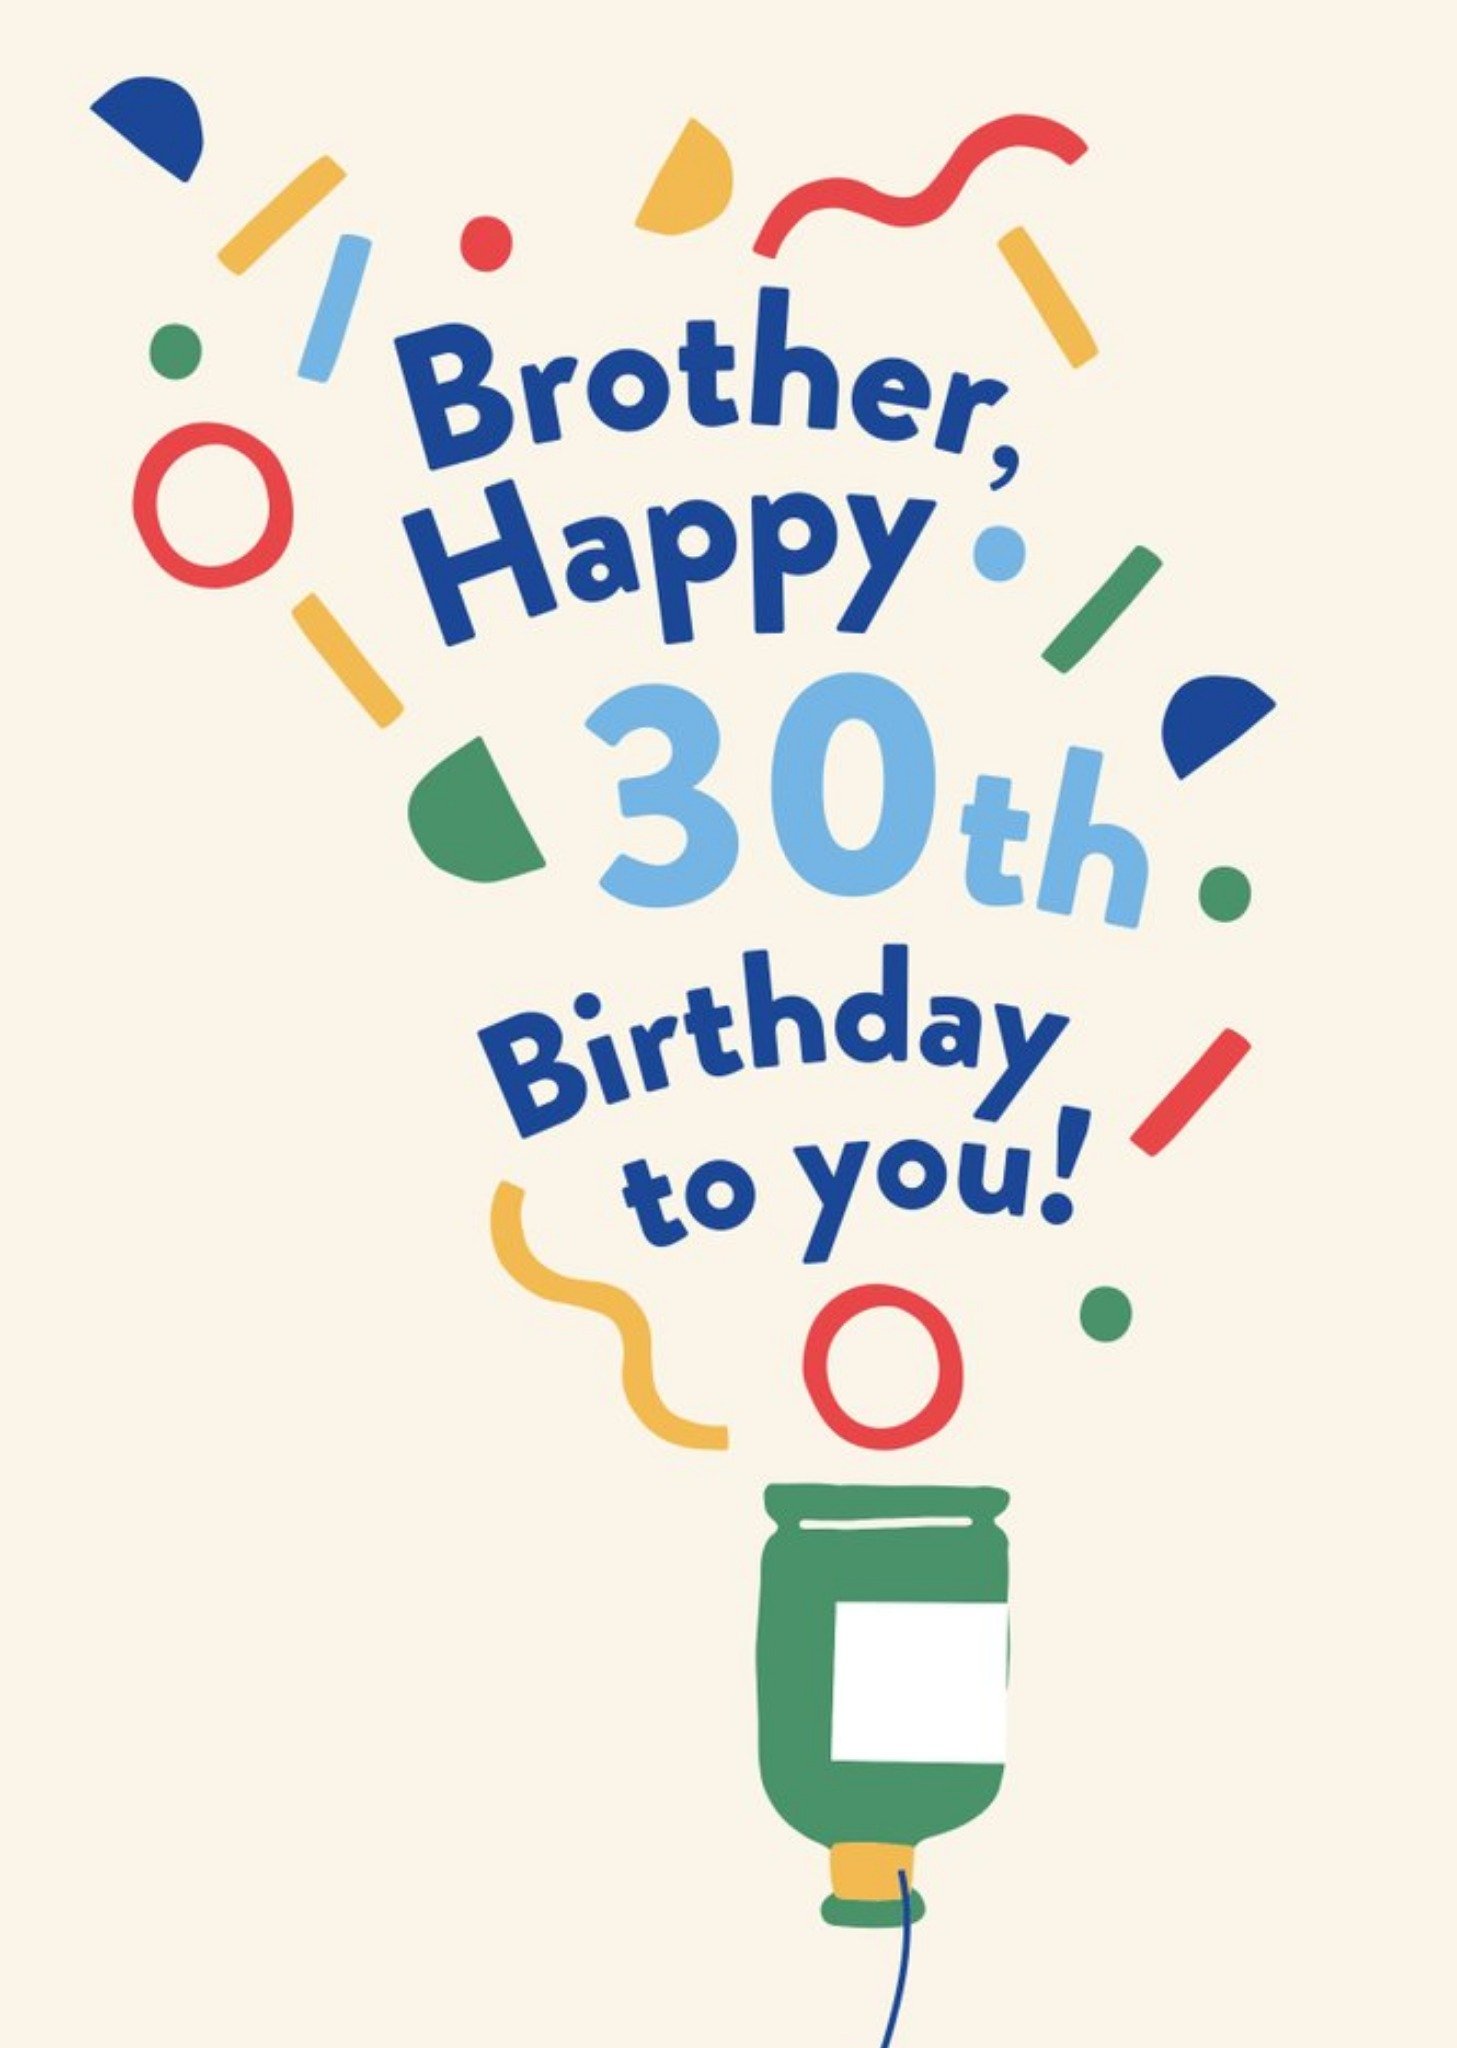 Moonpig Illustrated Modern Party Popper Design Brother Happy 30th Birthday To You Card Ecard